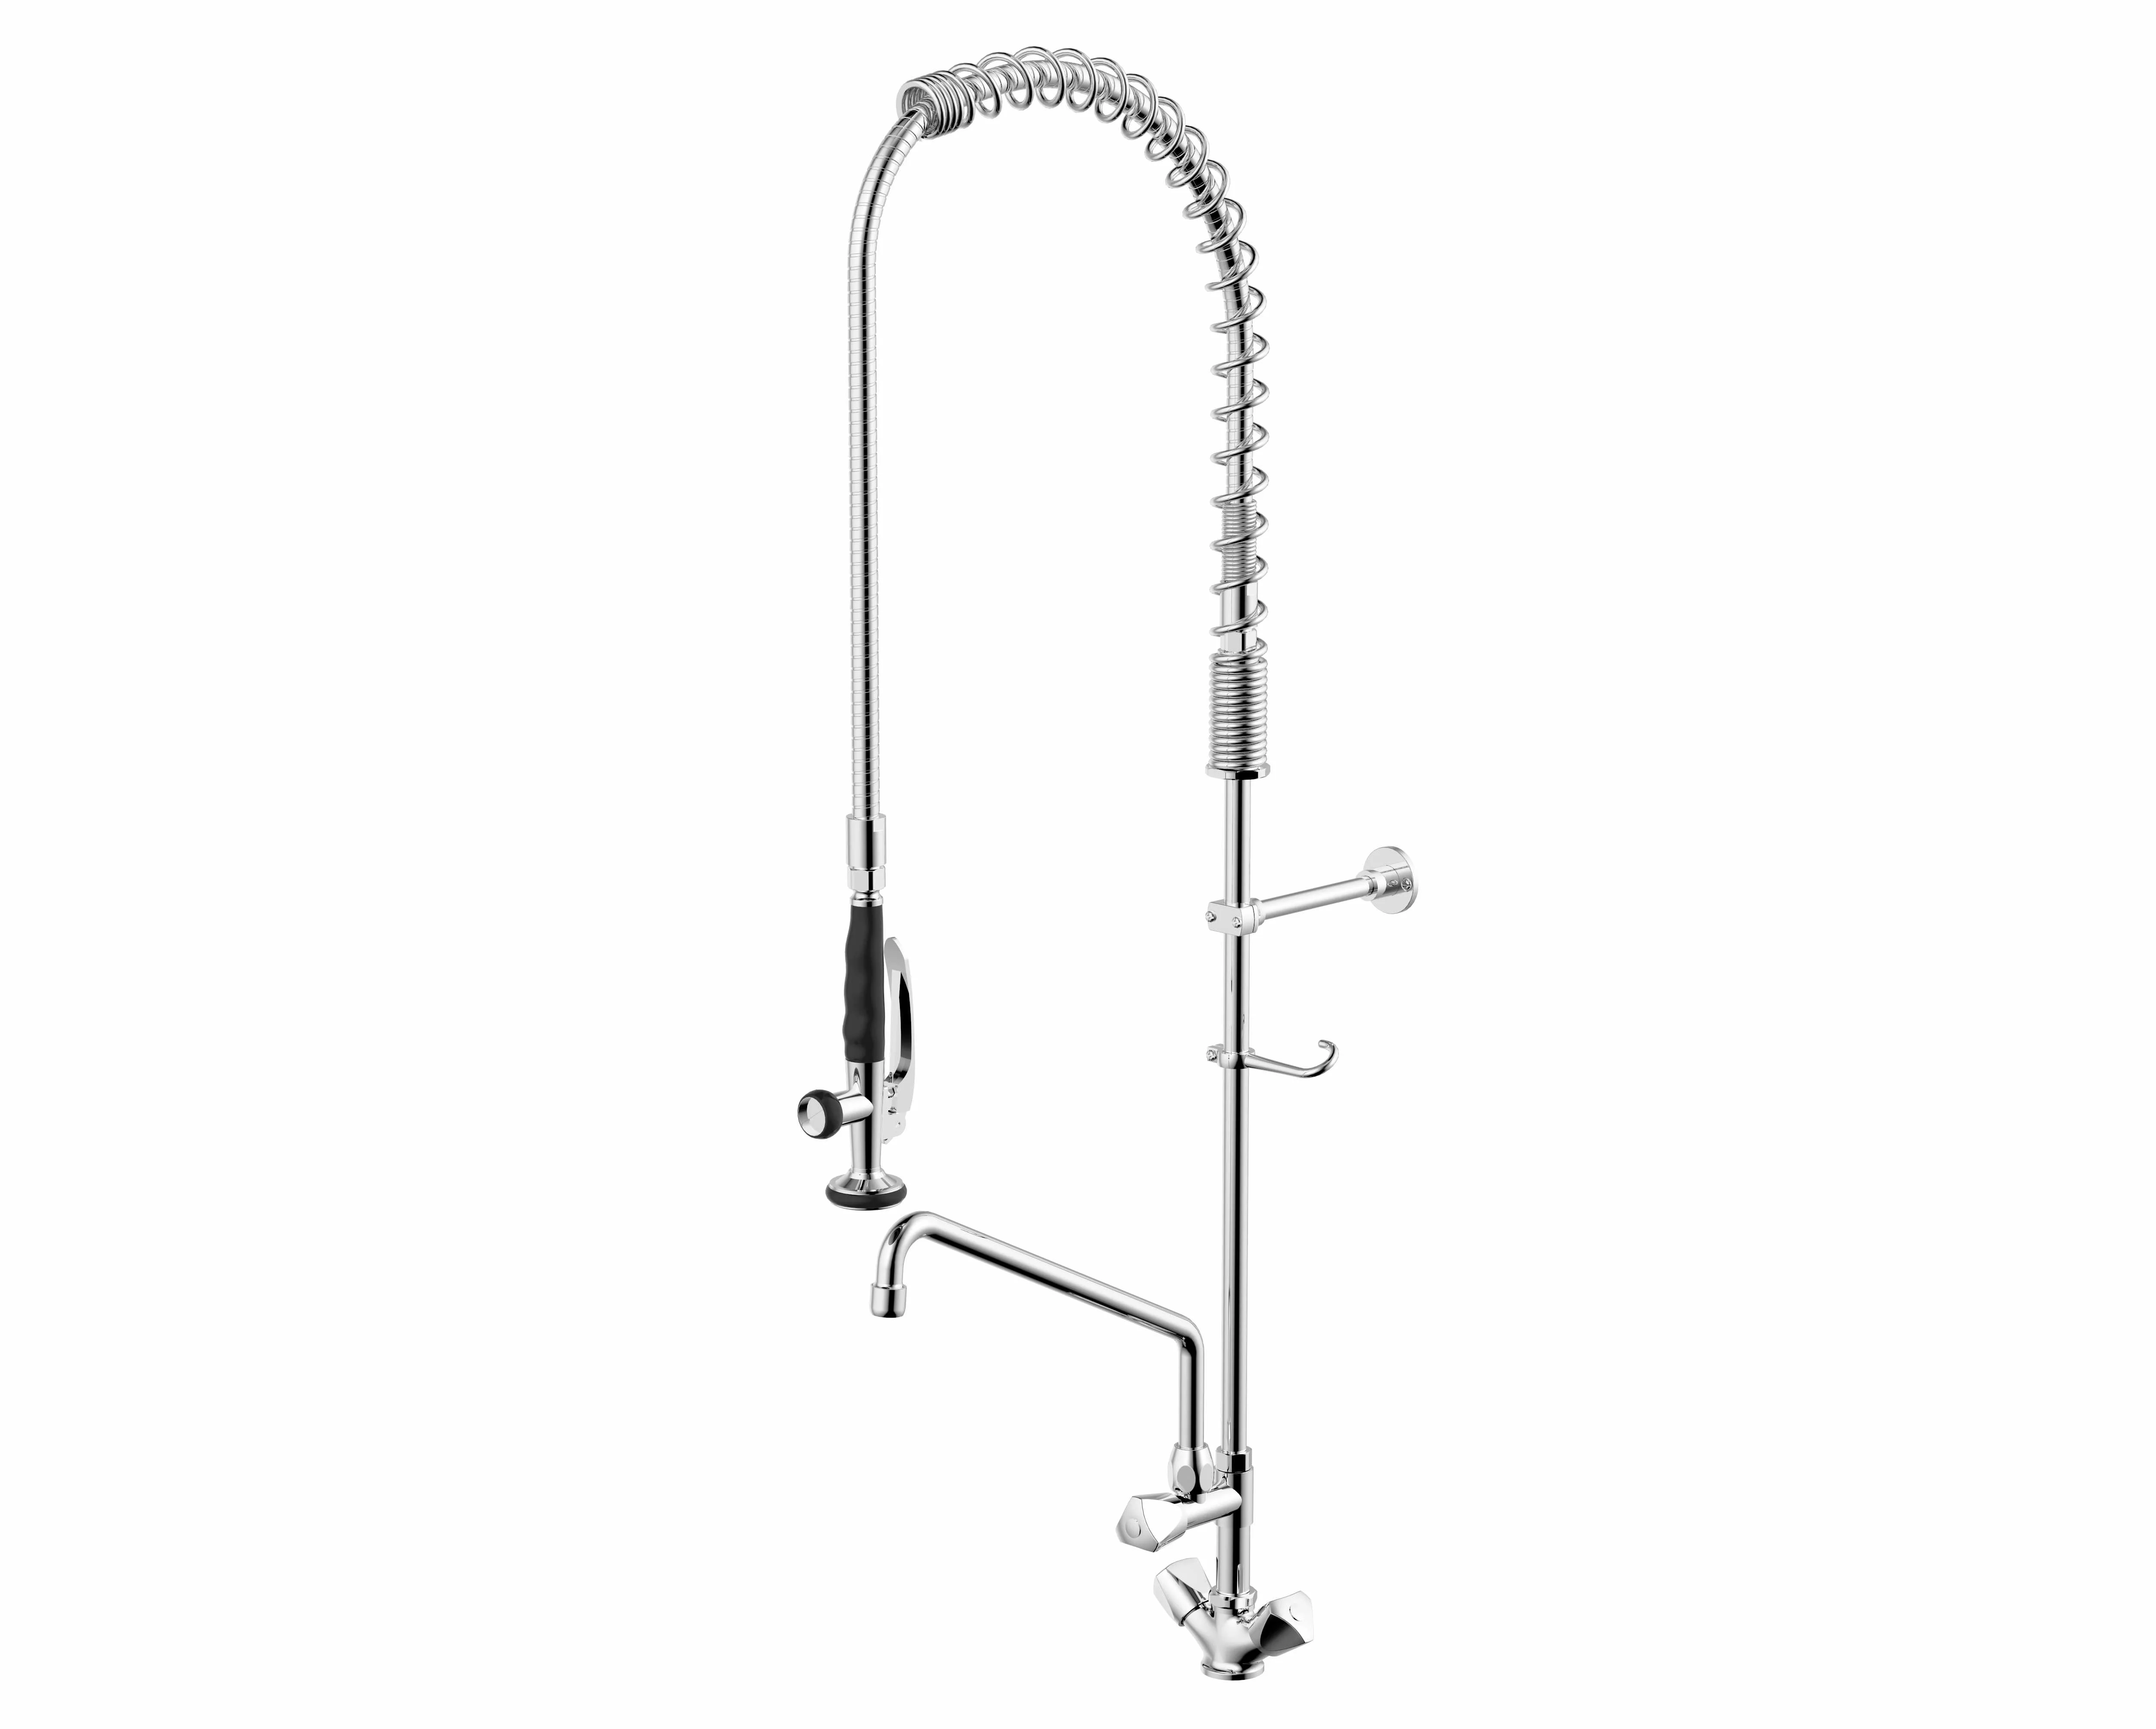 Hot New Products 2019 Two Handle Commercial Best Pull Down Kitchen Faucet Brass Mini Pre Rinse Unit With High Pressure Spray Buy Best Pull Down Kitchen Faucet For The Money